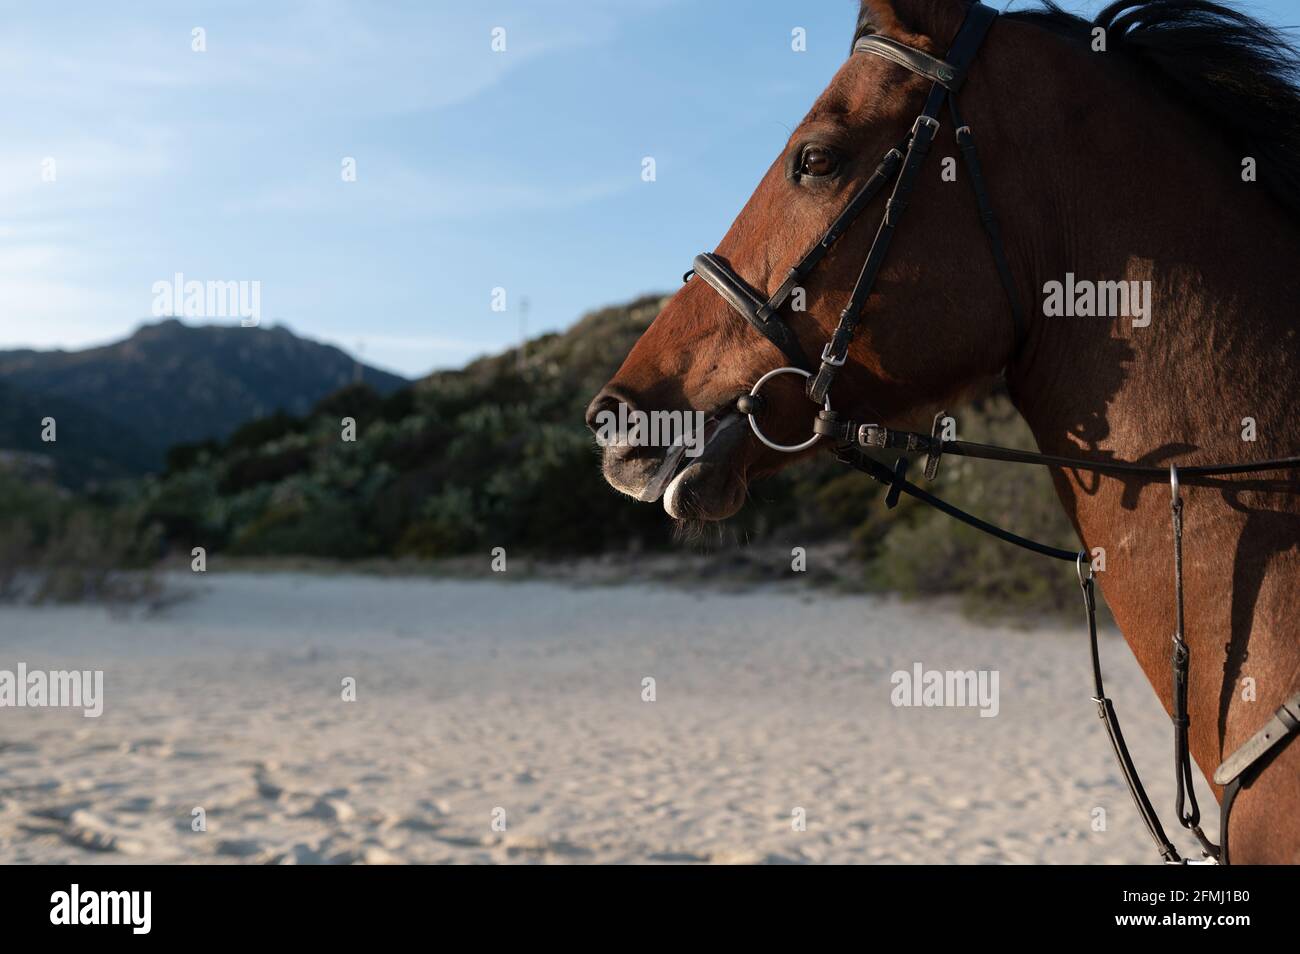 Muzzles of chestnut horse with reins against wavy ocean and green mount in daylight Stock Photo